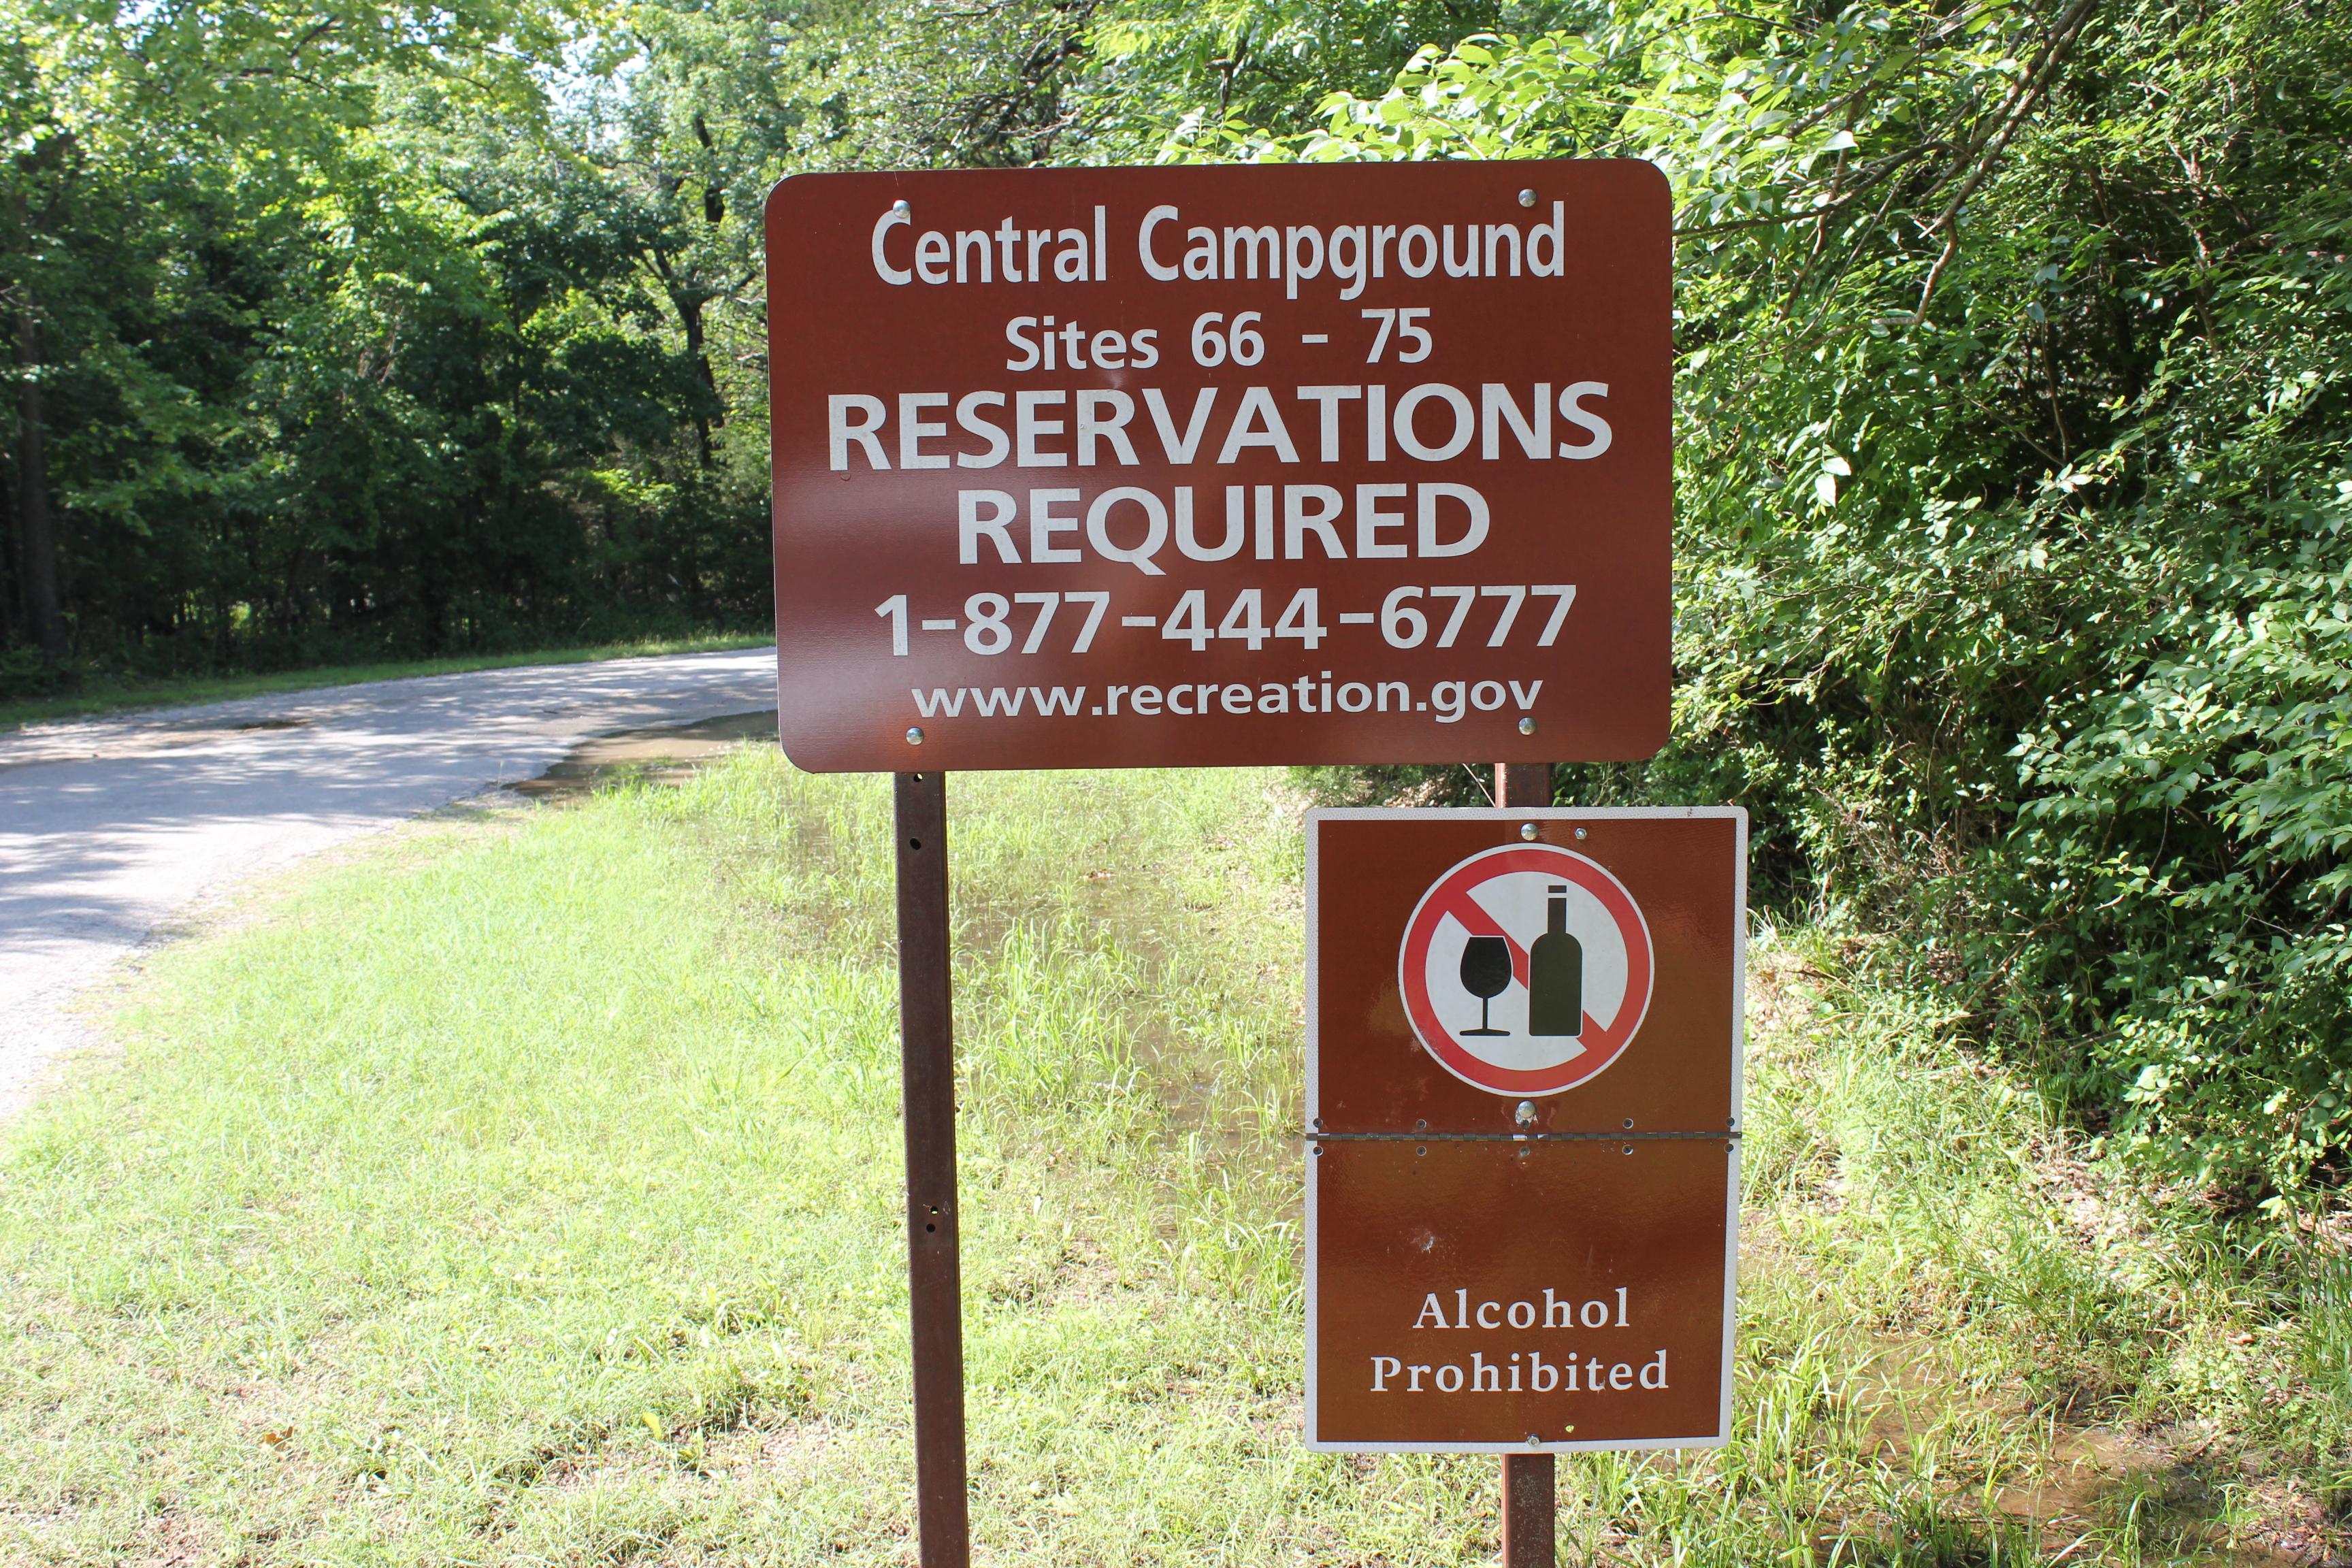 A brown entrance sign for Central Campground, stating that reservations are required.